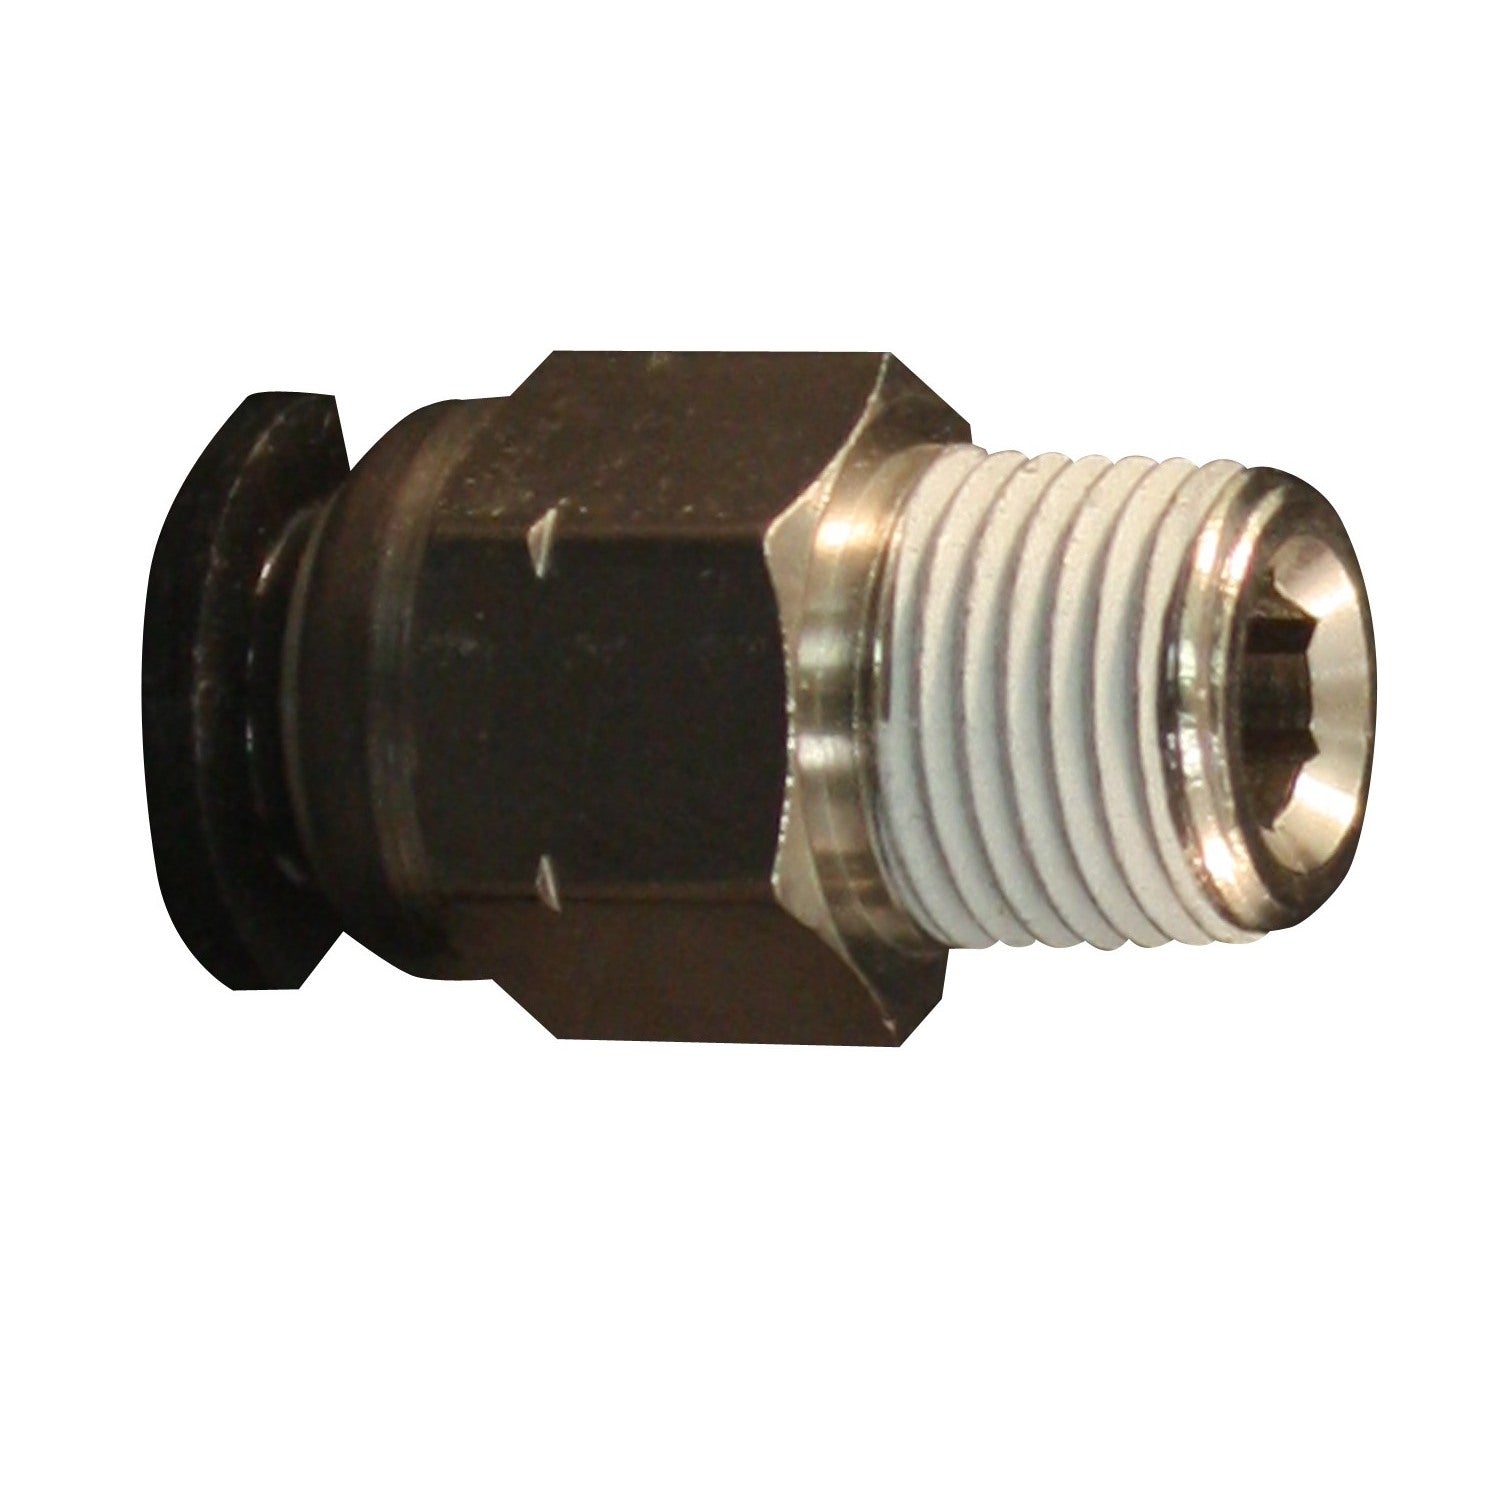 s-2200-4 product